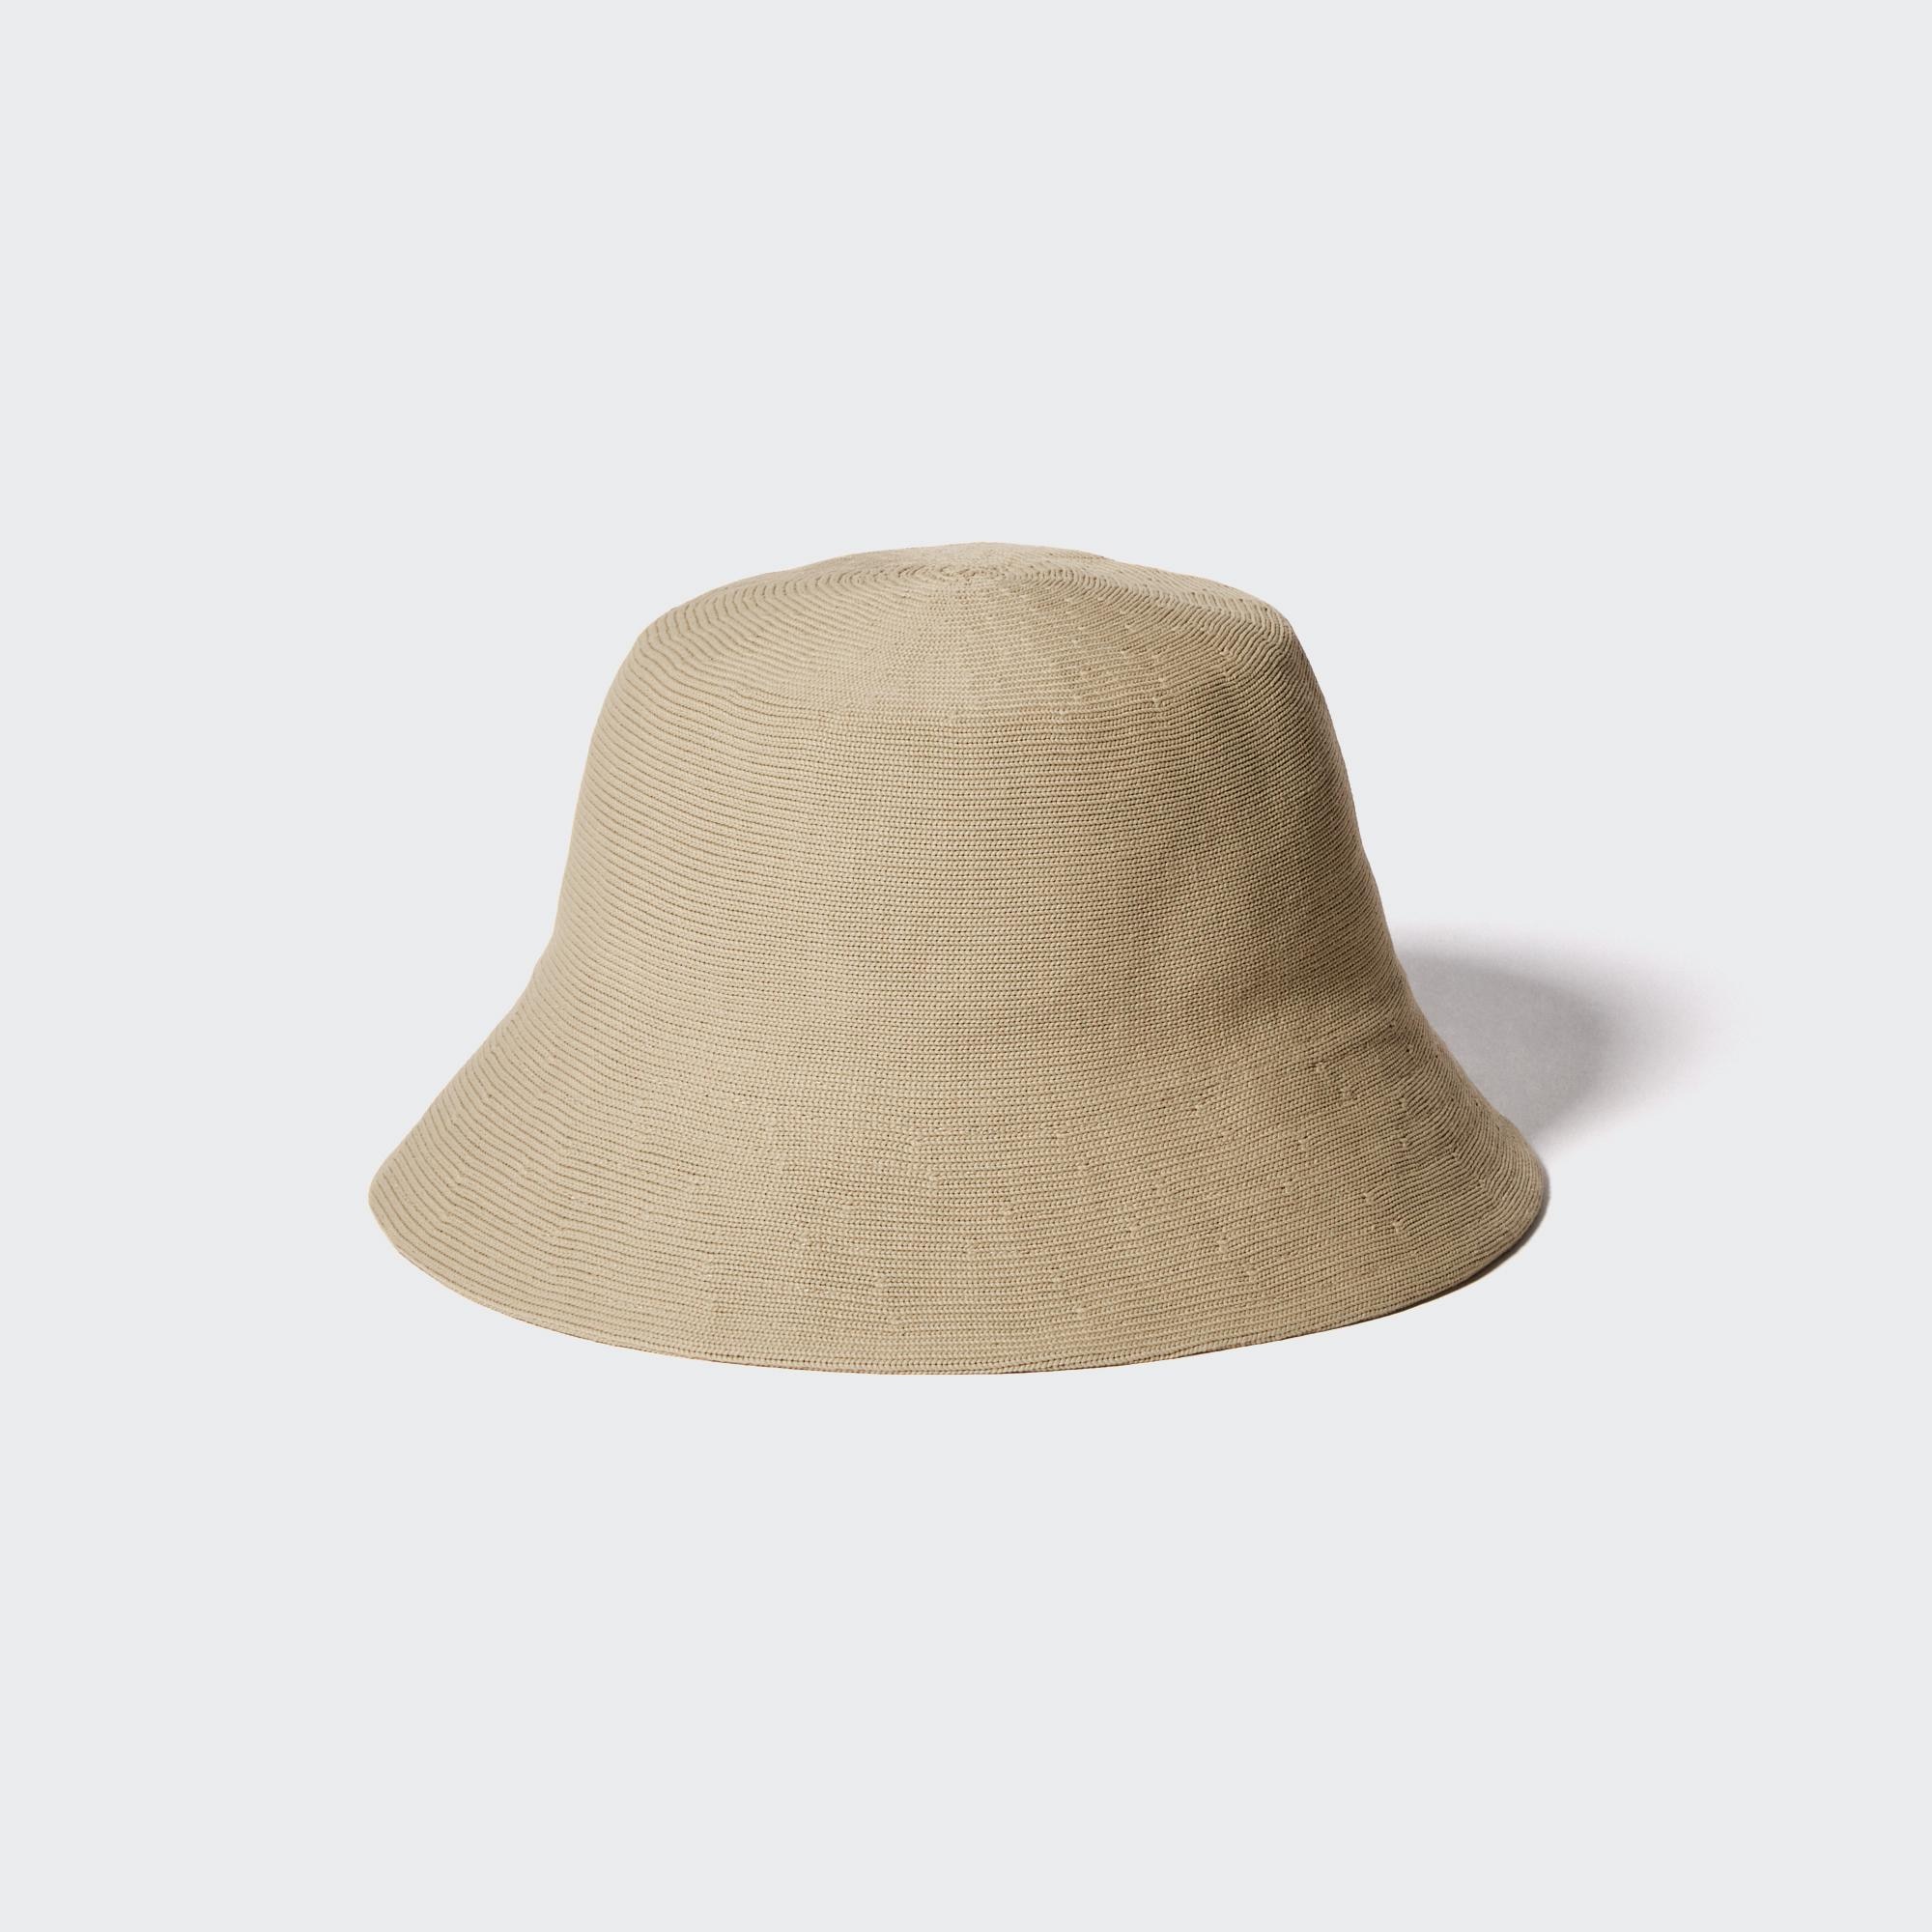 UV Protection Knitted Bucket Hat